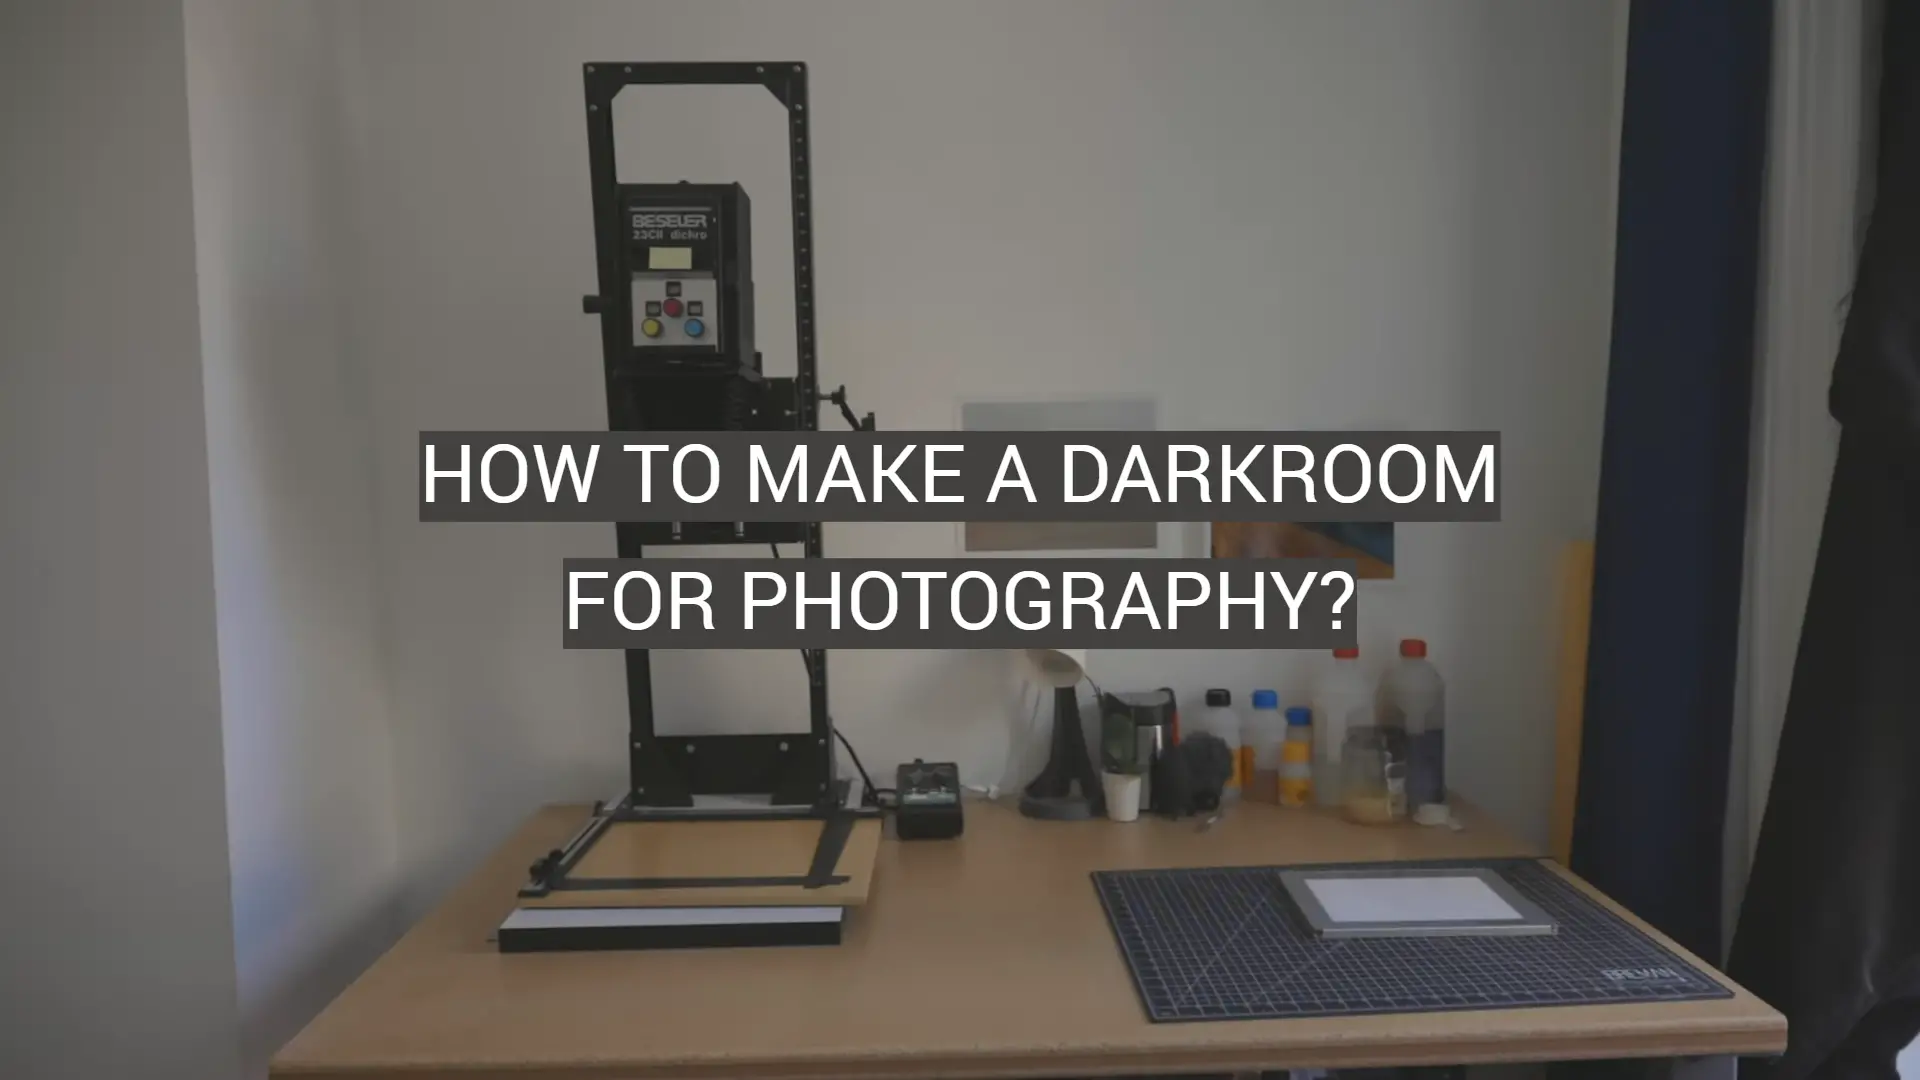 How to Make a Darkroom for Photography?